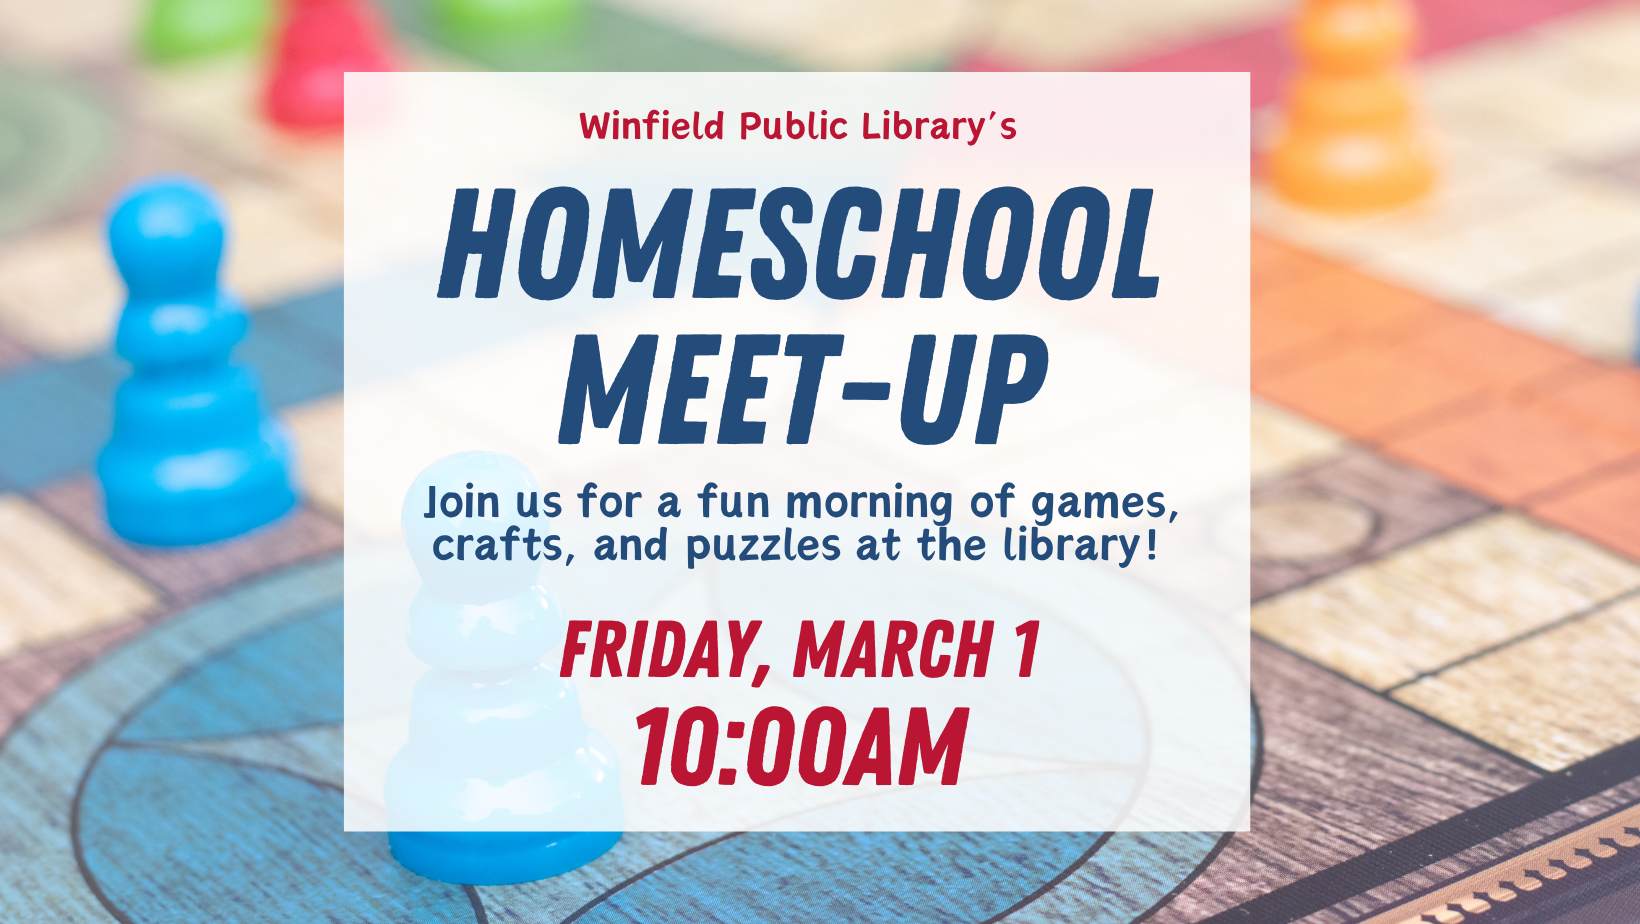 background image is board game and pieces with text reading "Home School Meet-Up March 1st at 10:00 am"